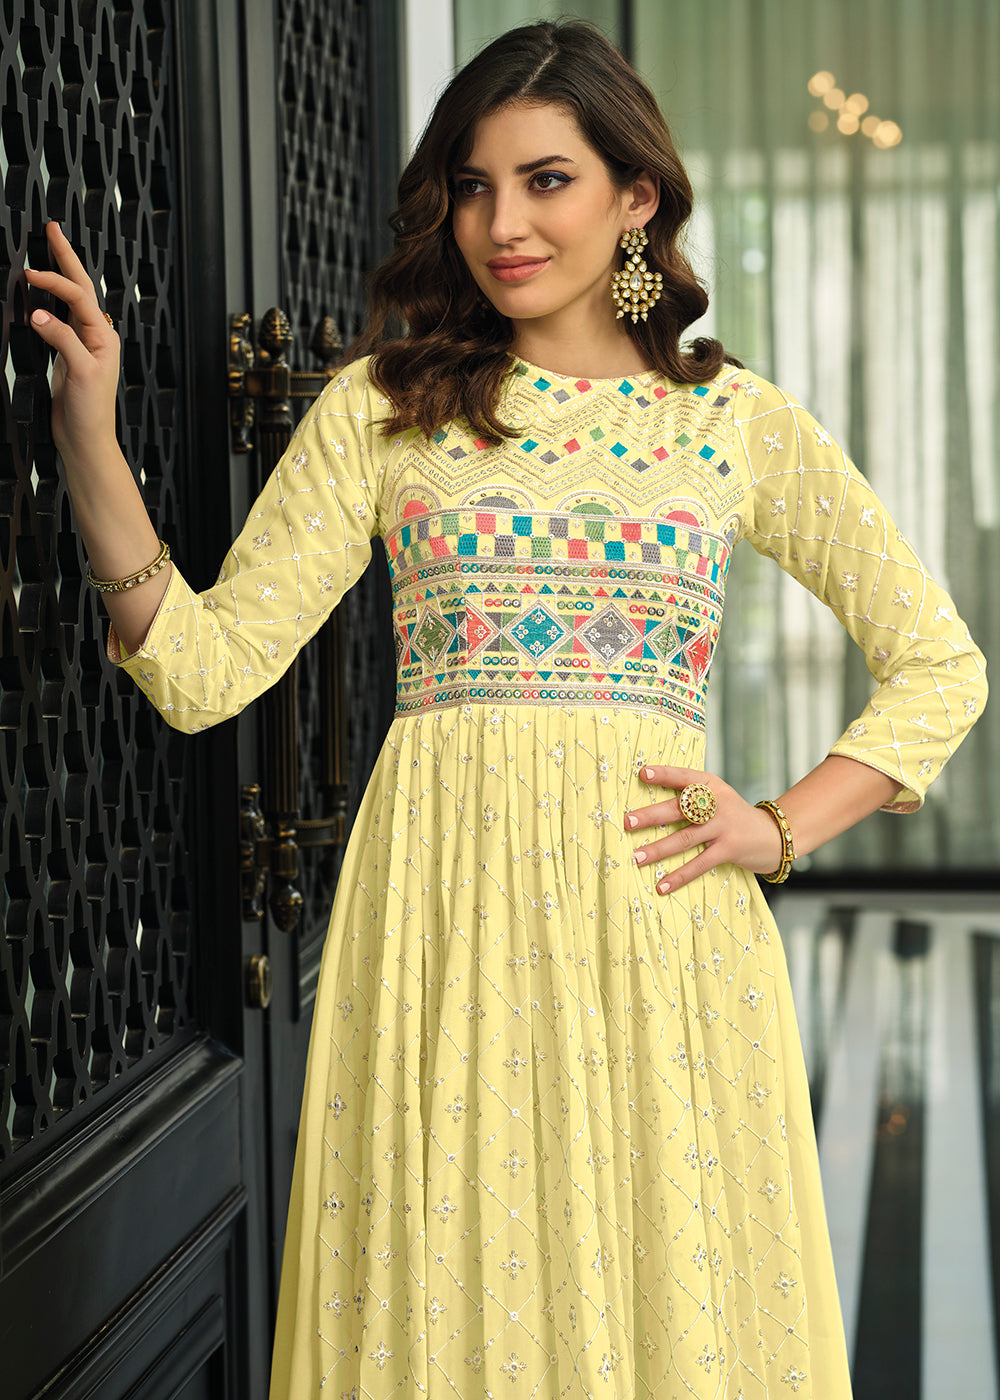 Shop Now Lime Yellow Trendy Georgette Embellished Anarkali Suit Online at Empress Clothing in USA. 